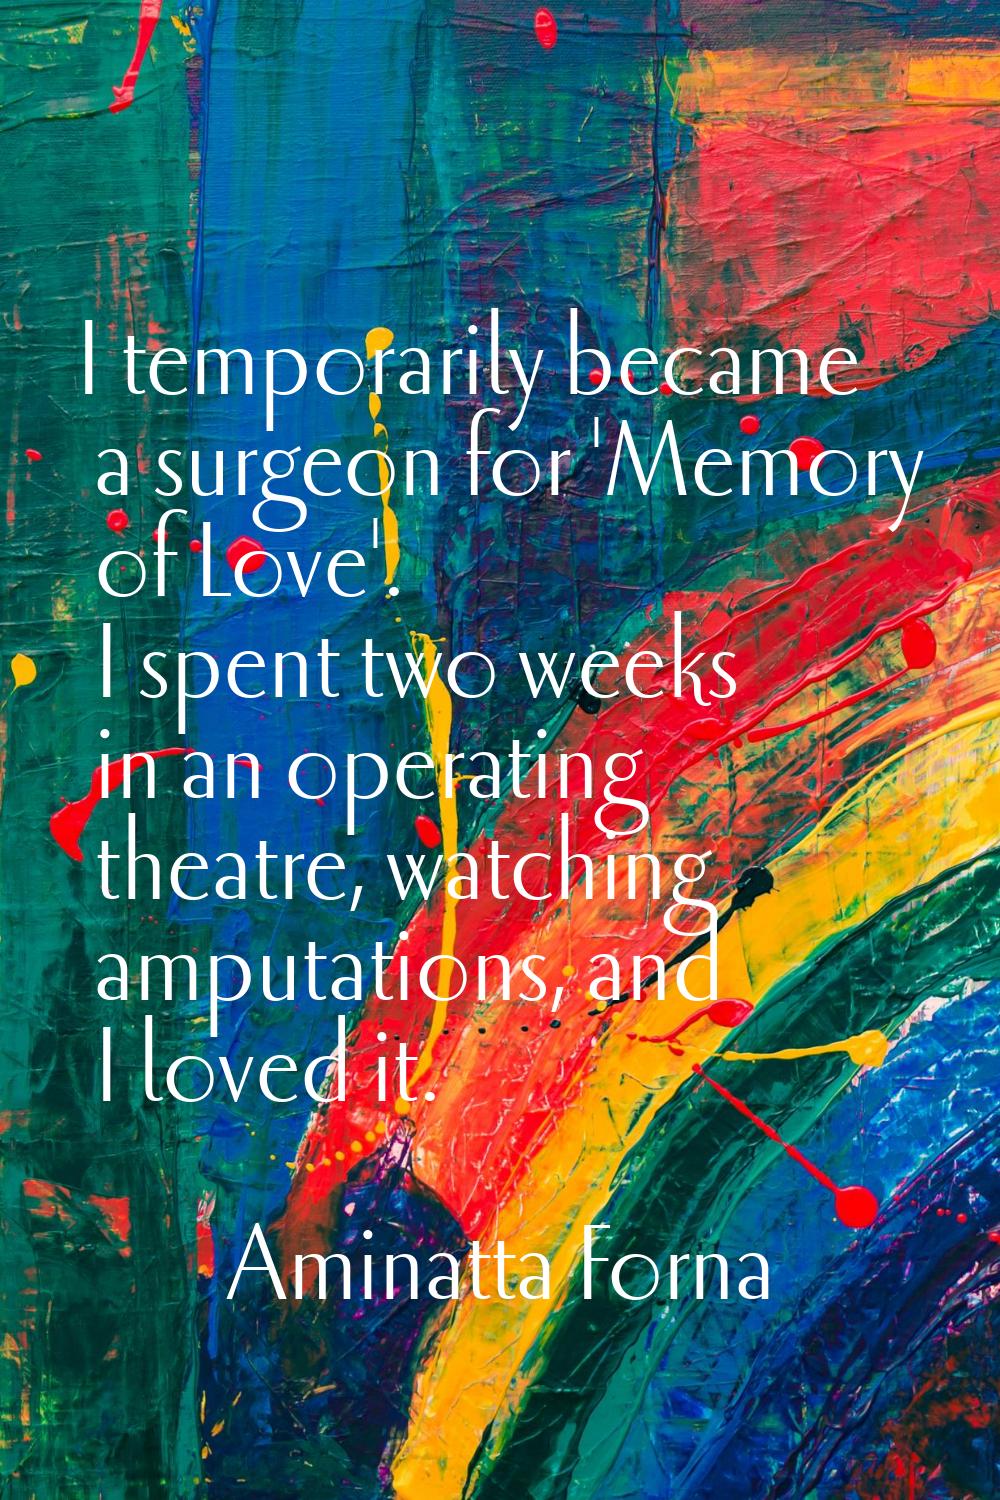 I temporarily became a surgeon for 'Memory of Love'. I spent two weeks in an operating theatre, wat